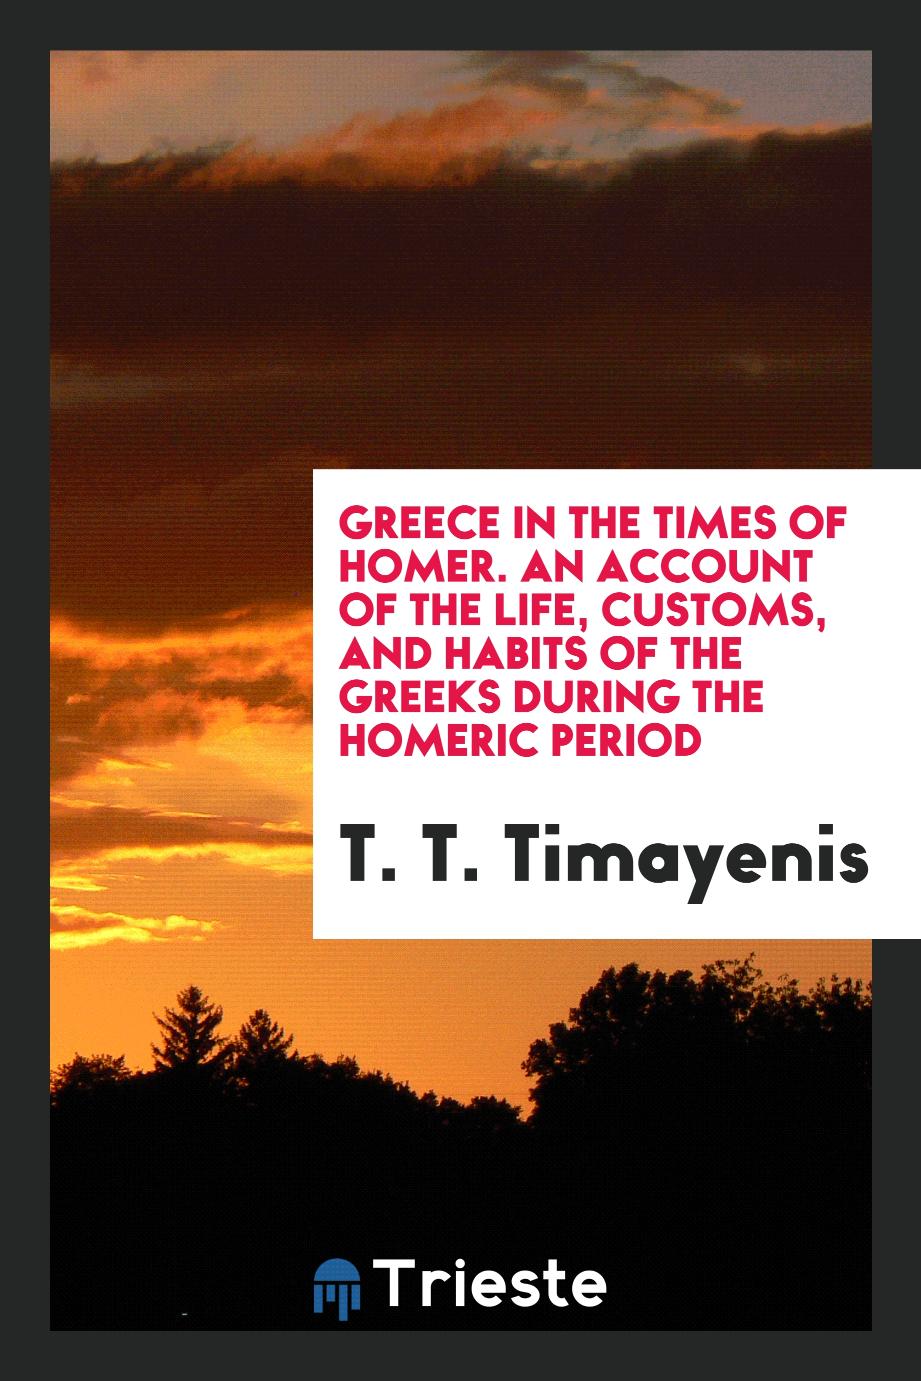 Greece in the Times of Homer. An Account of the Life, Customs, and Habits of the Greeks During the Homeric Period